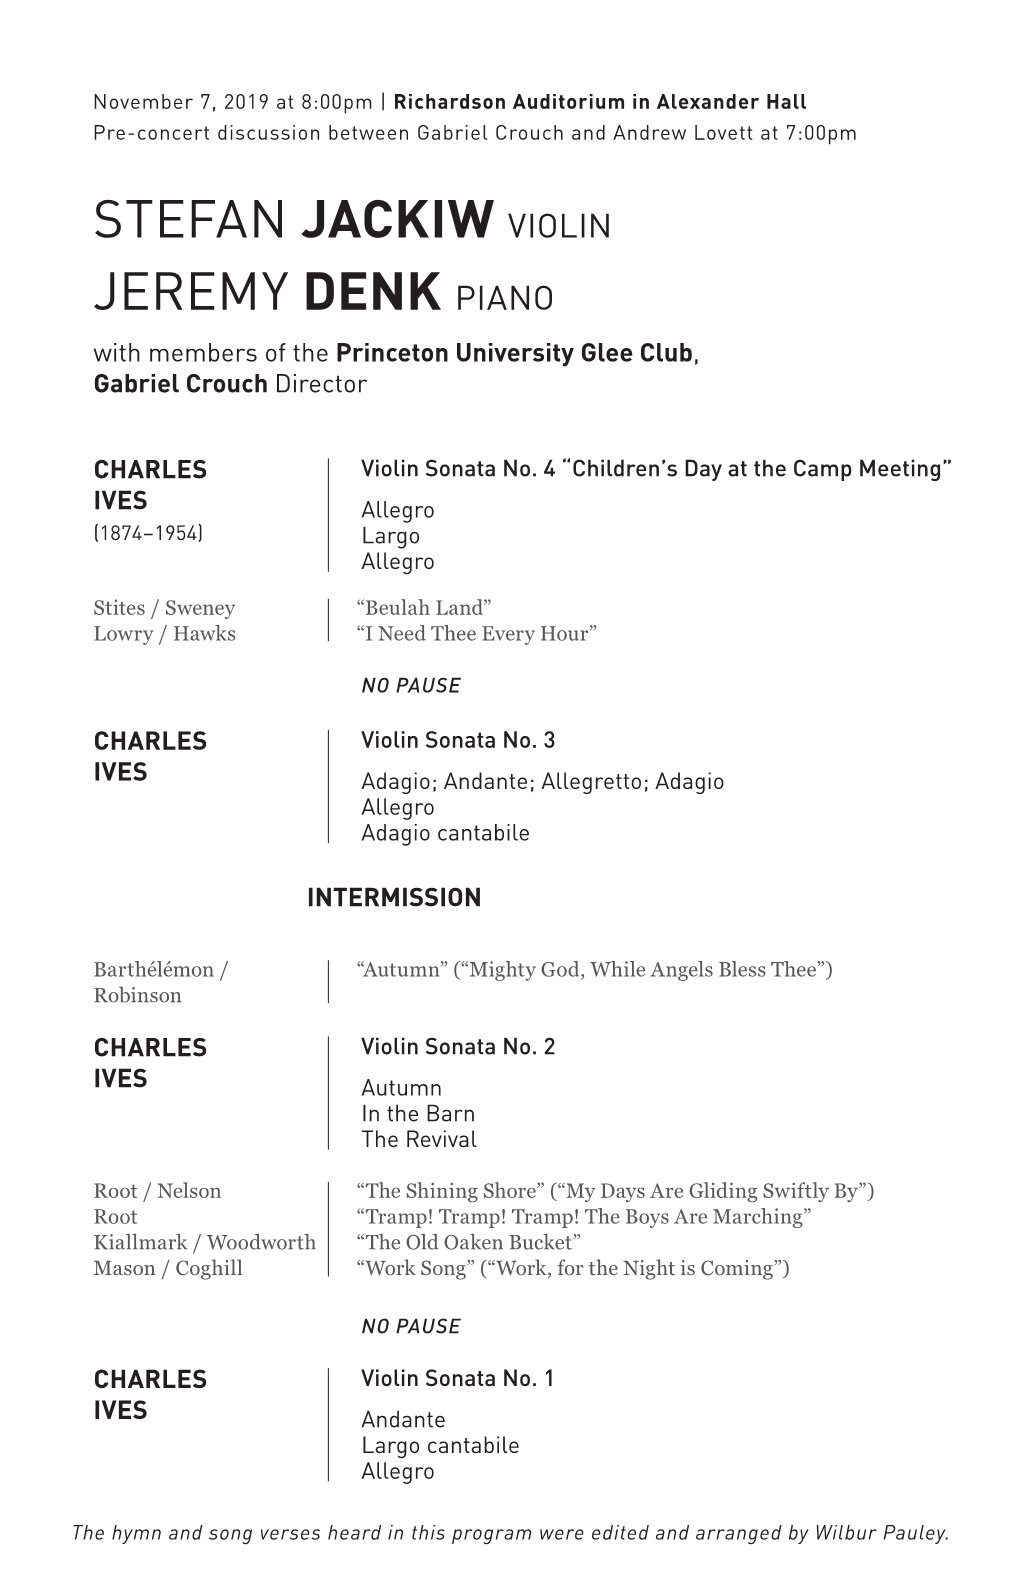 STEFAN JACKIW VIOLIN JEREMY DENK PIANO with Members of the Princeton University Glee Club, Gabriel Crouch Director